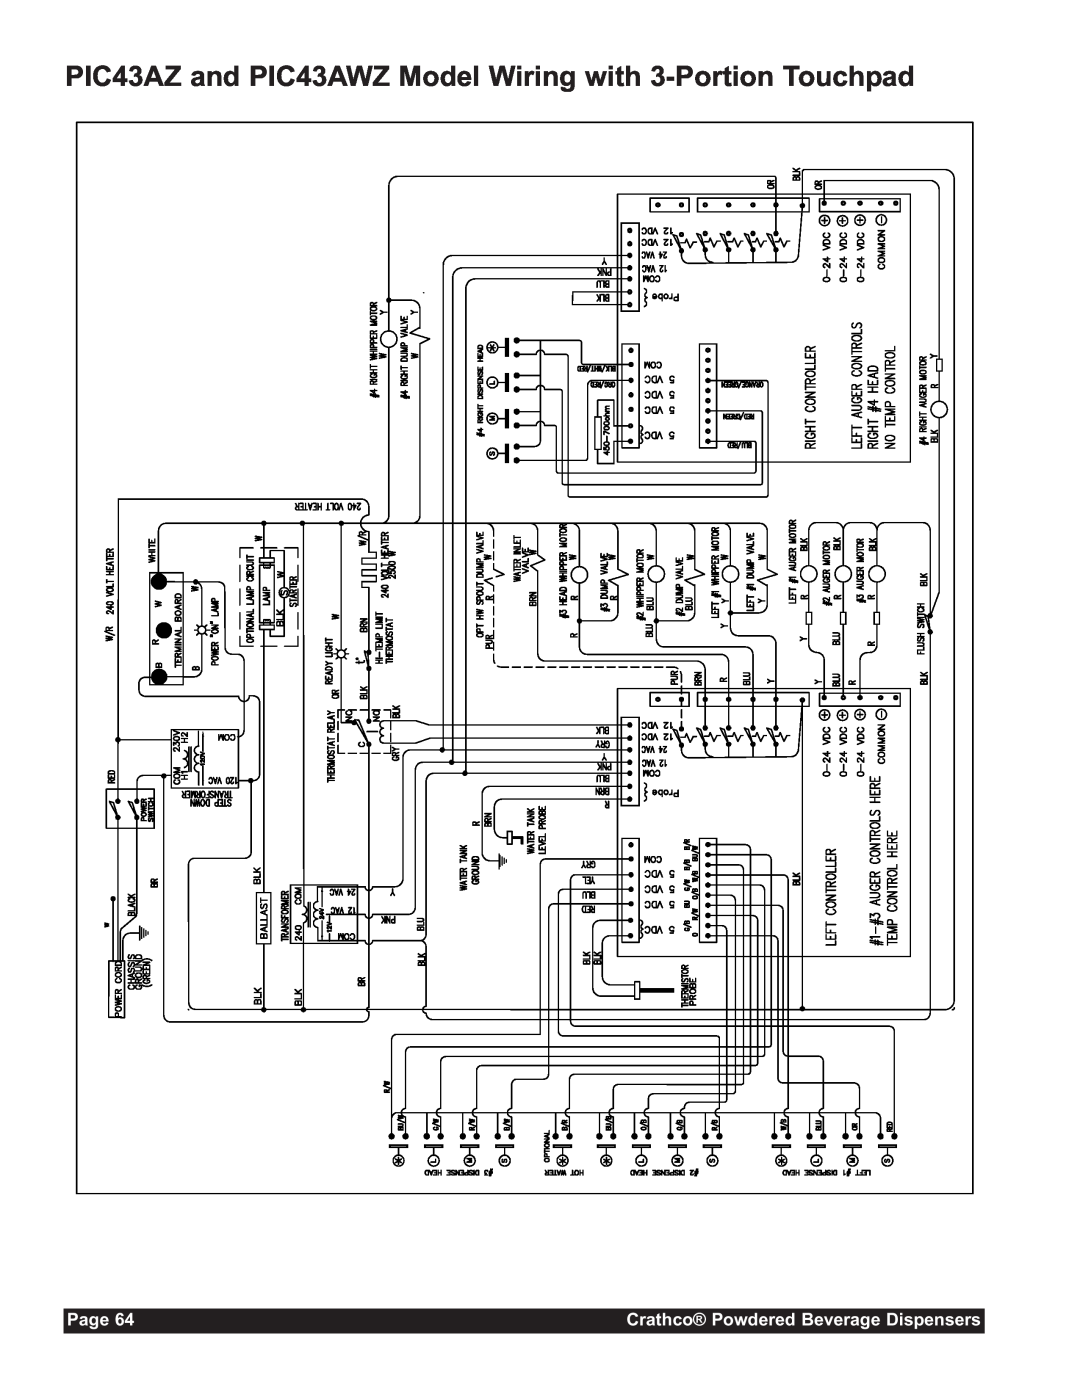 Grindmaster CC-302-20 service manual PIC43AZ and PIC43AWZ Model Wiring with 3-Portion Touchpad, Page 